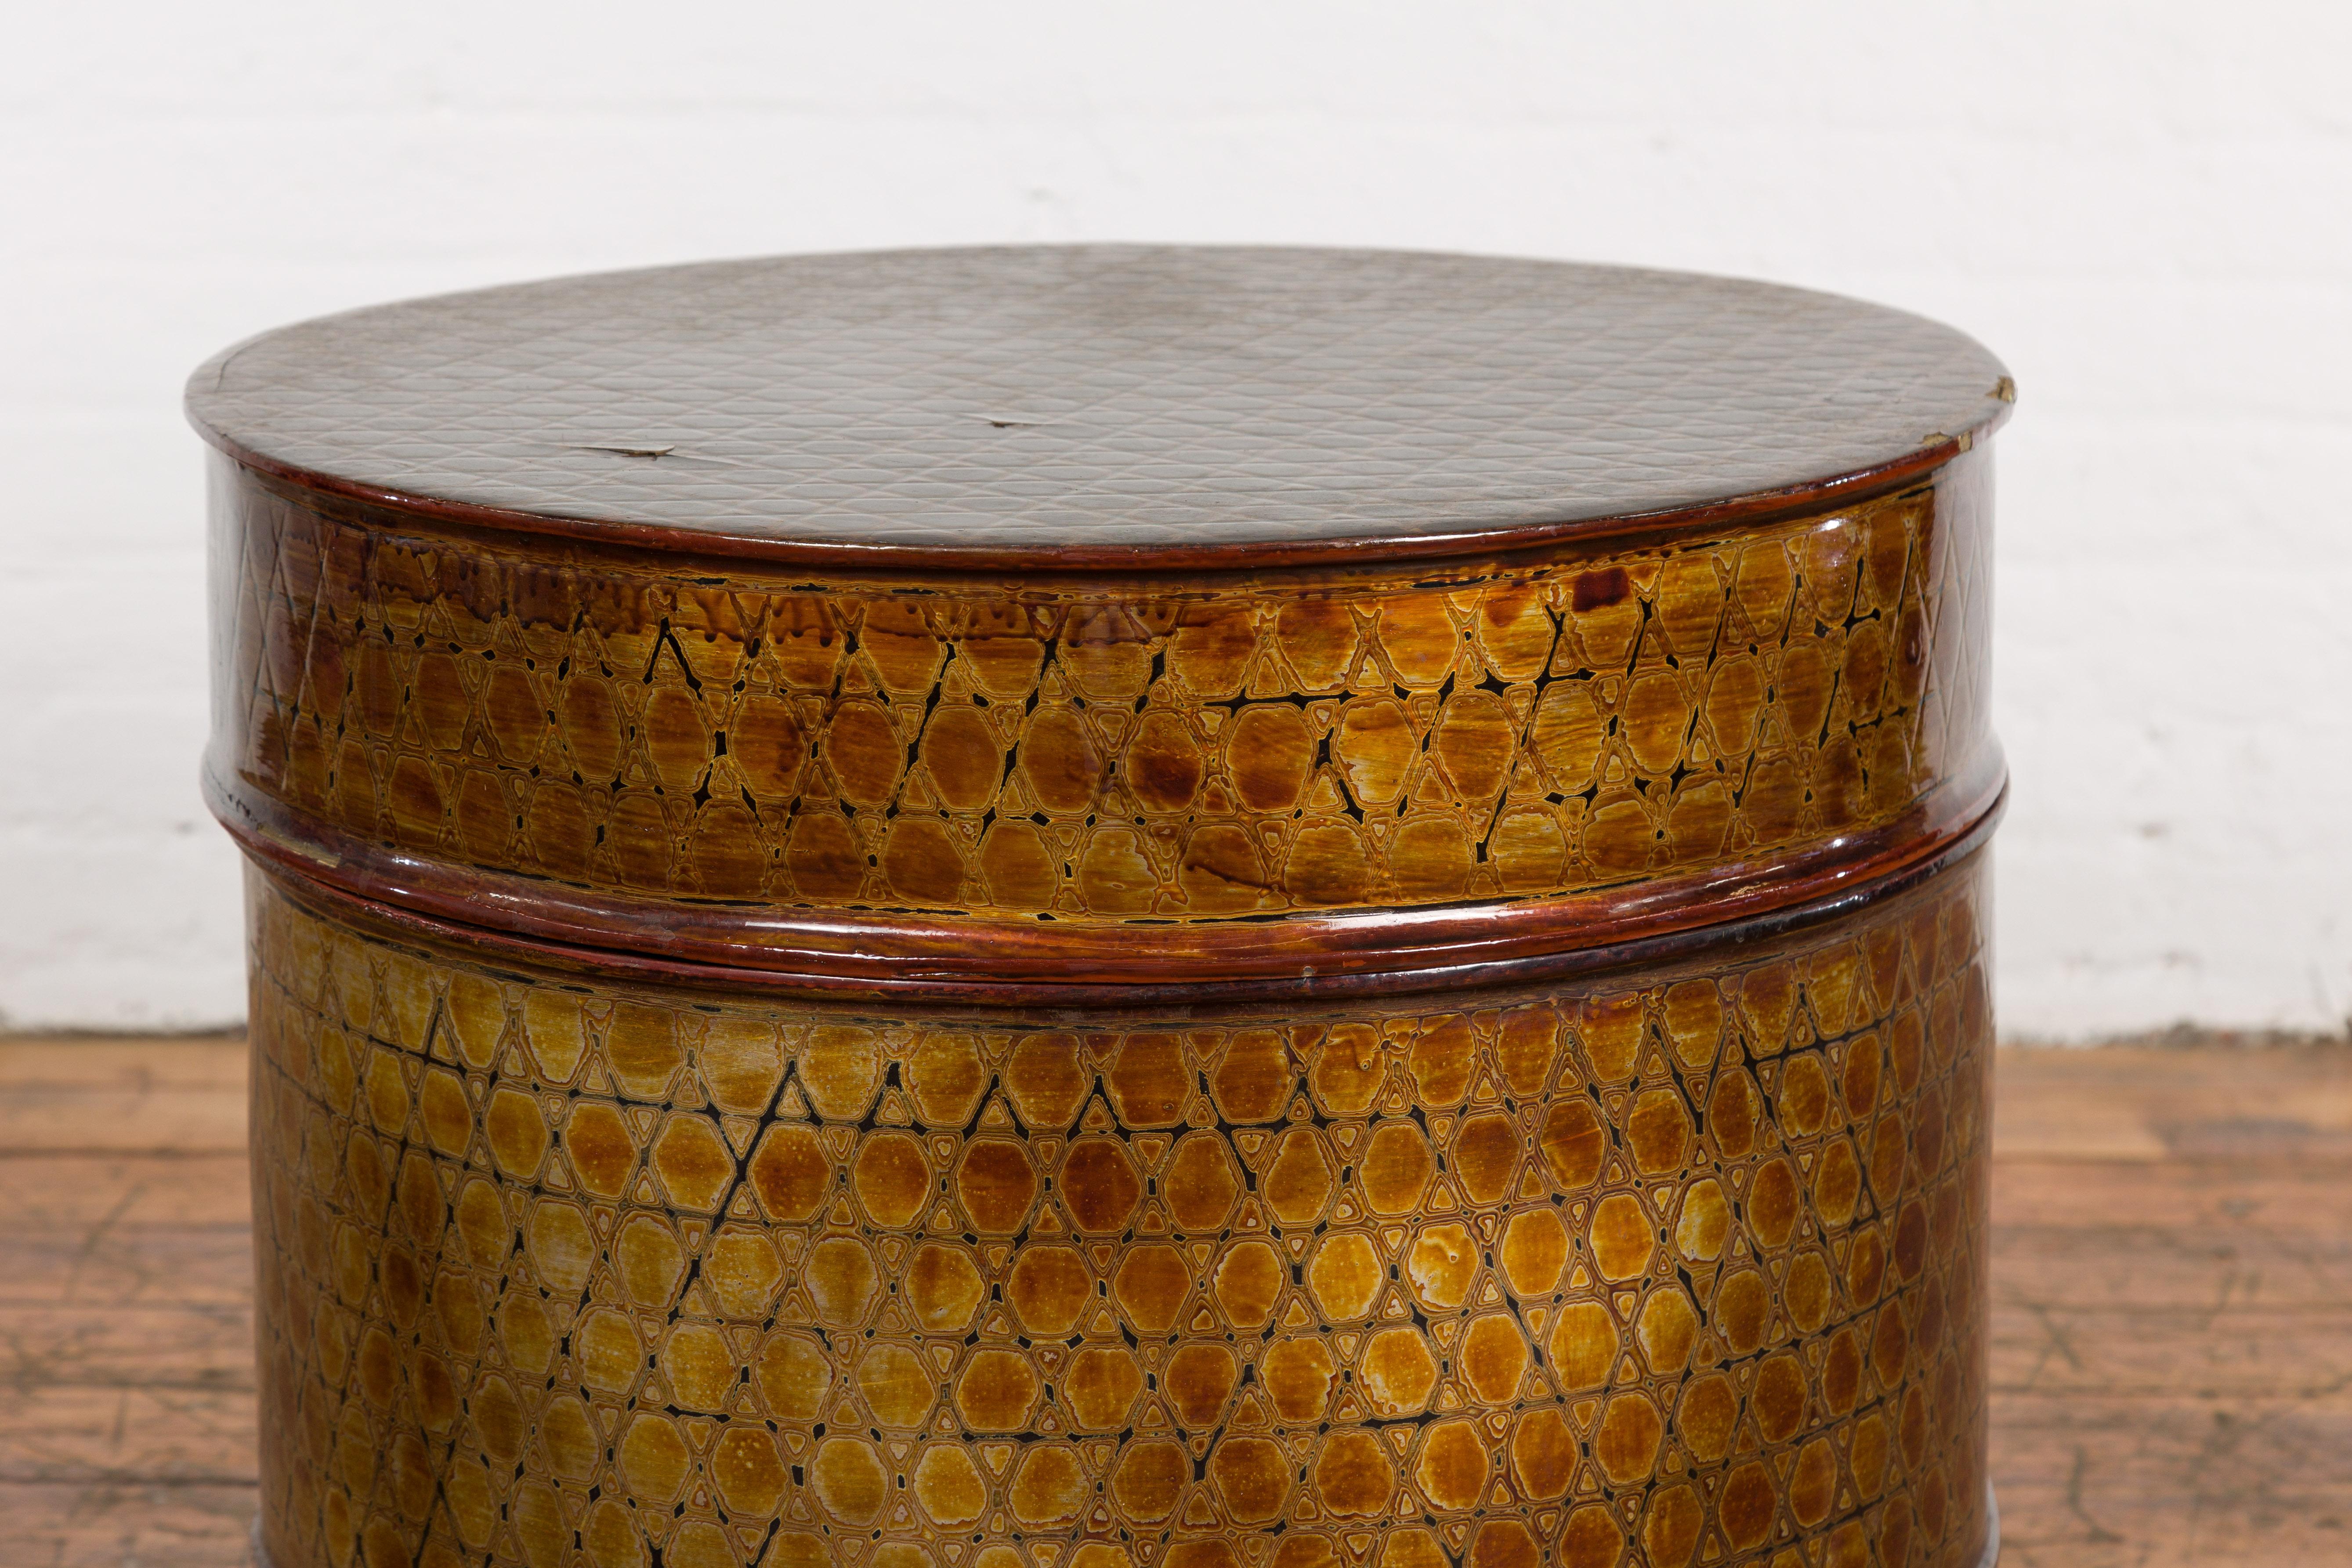 Lacquered Thai Vintage Negora Lacquer Circular Storage Bin with Snake Skin Patterns For Sale